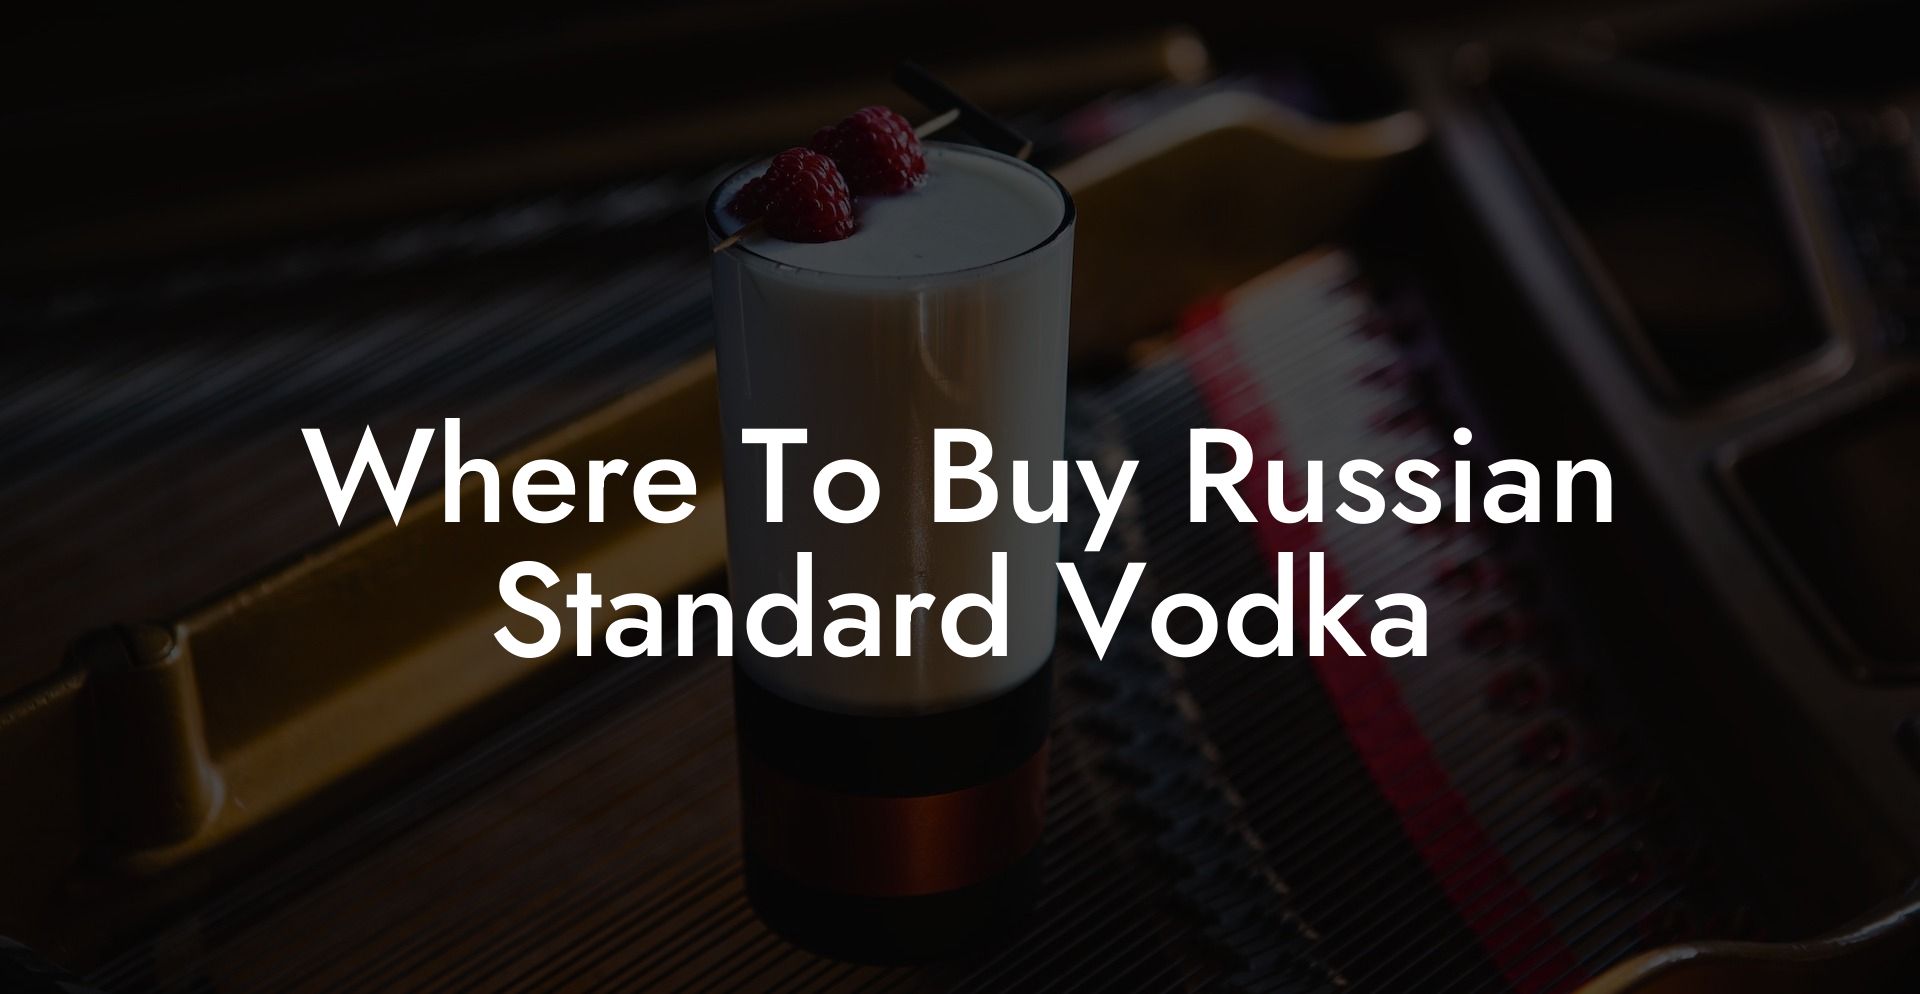 Where To Buy Russian Standard Vodka